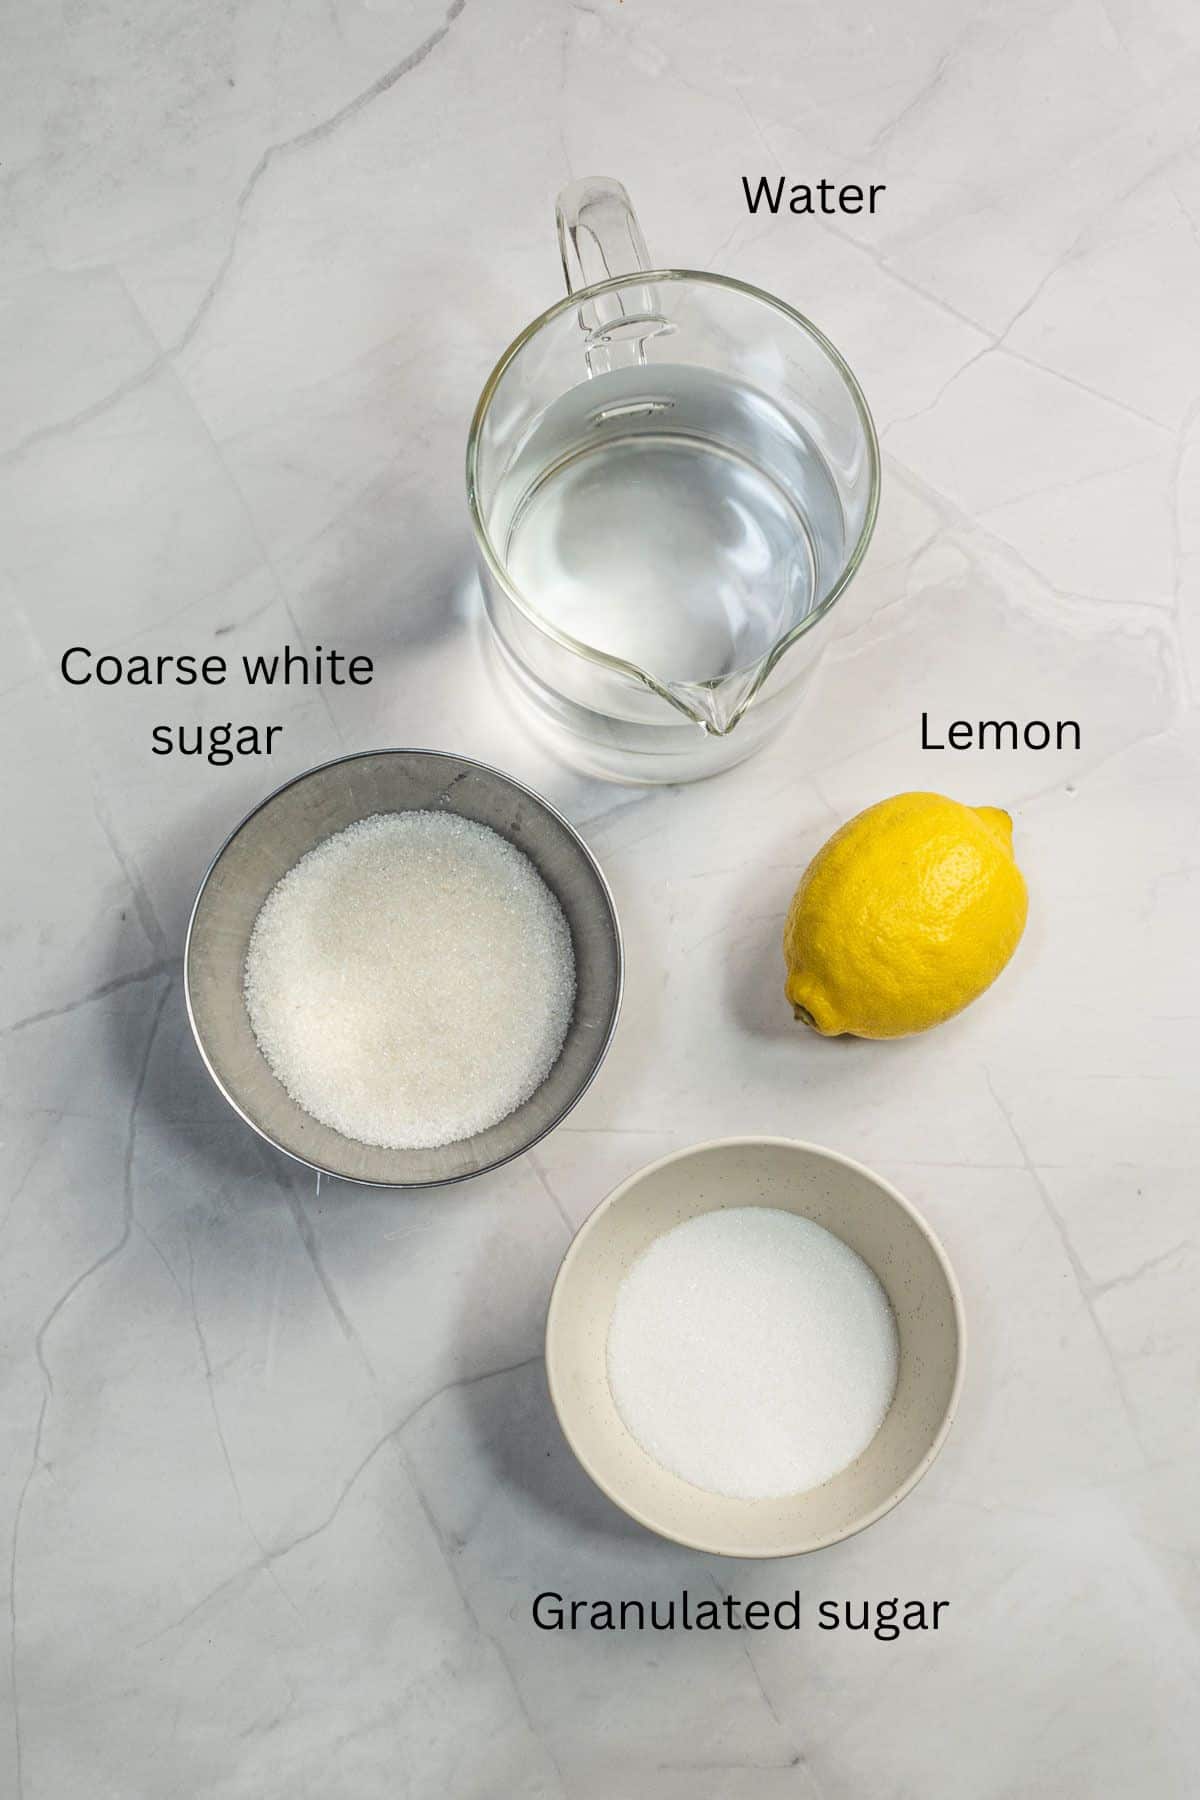 A jar of water, 2 bowls of sugar and one lemon against a marble background.